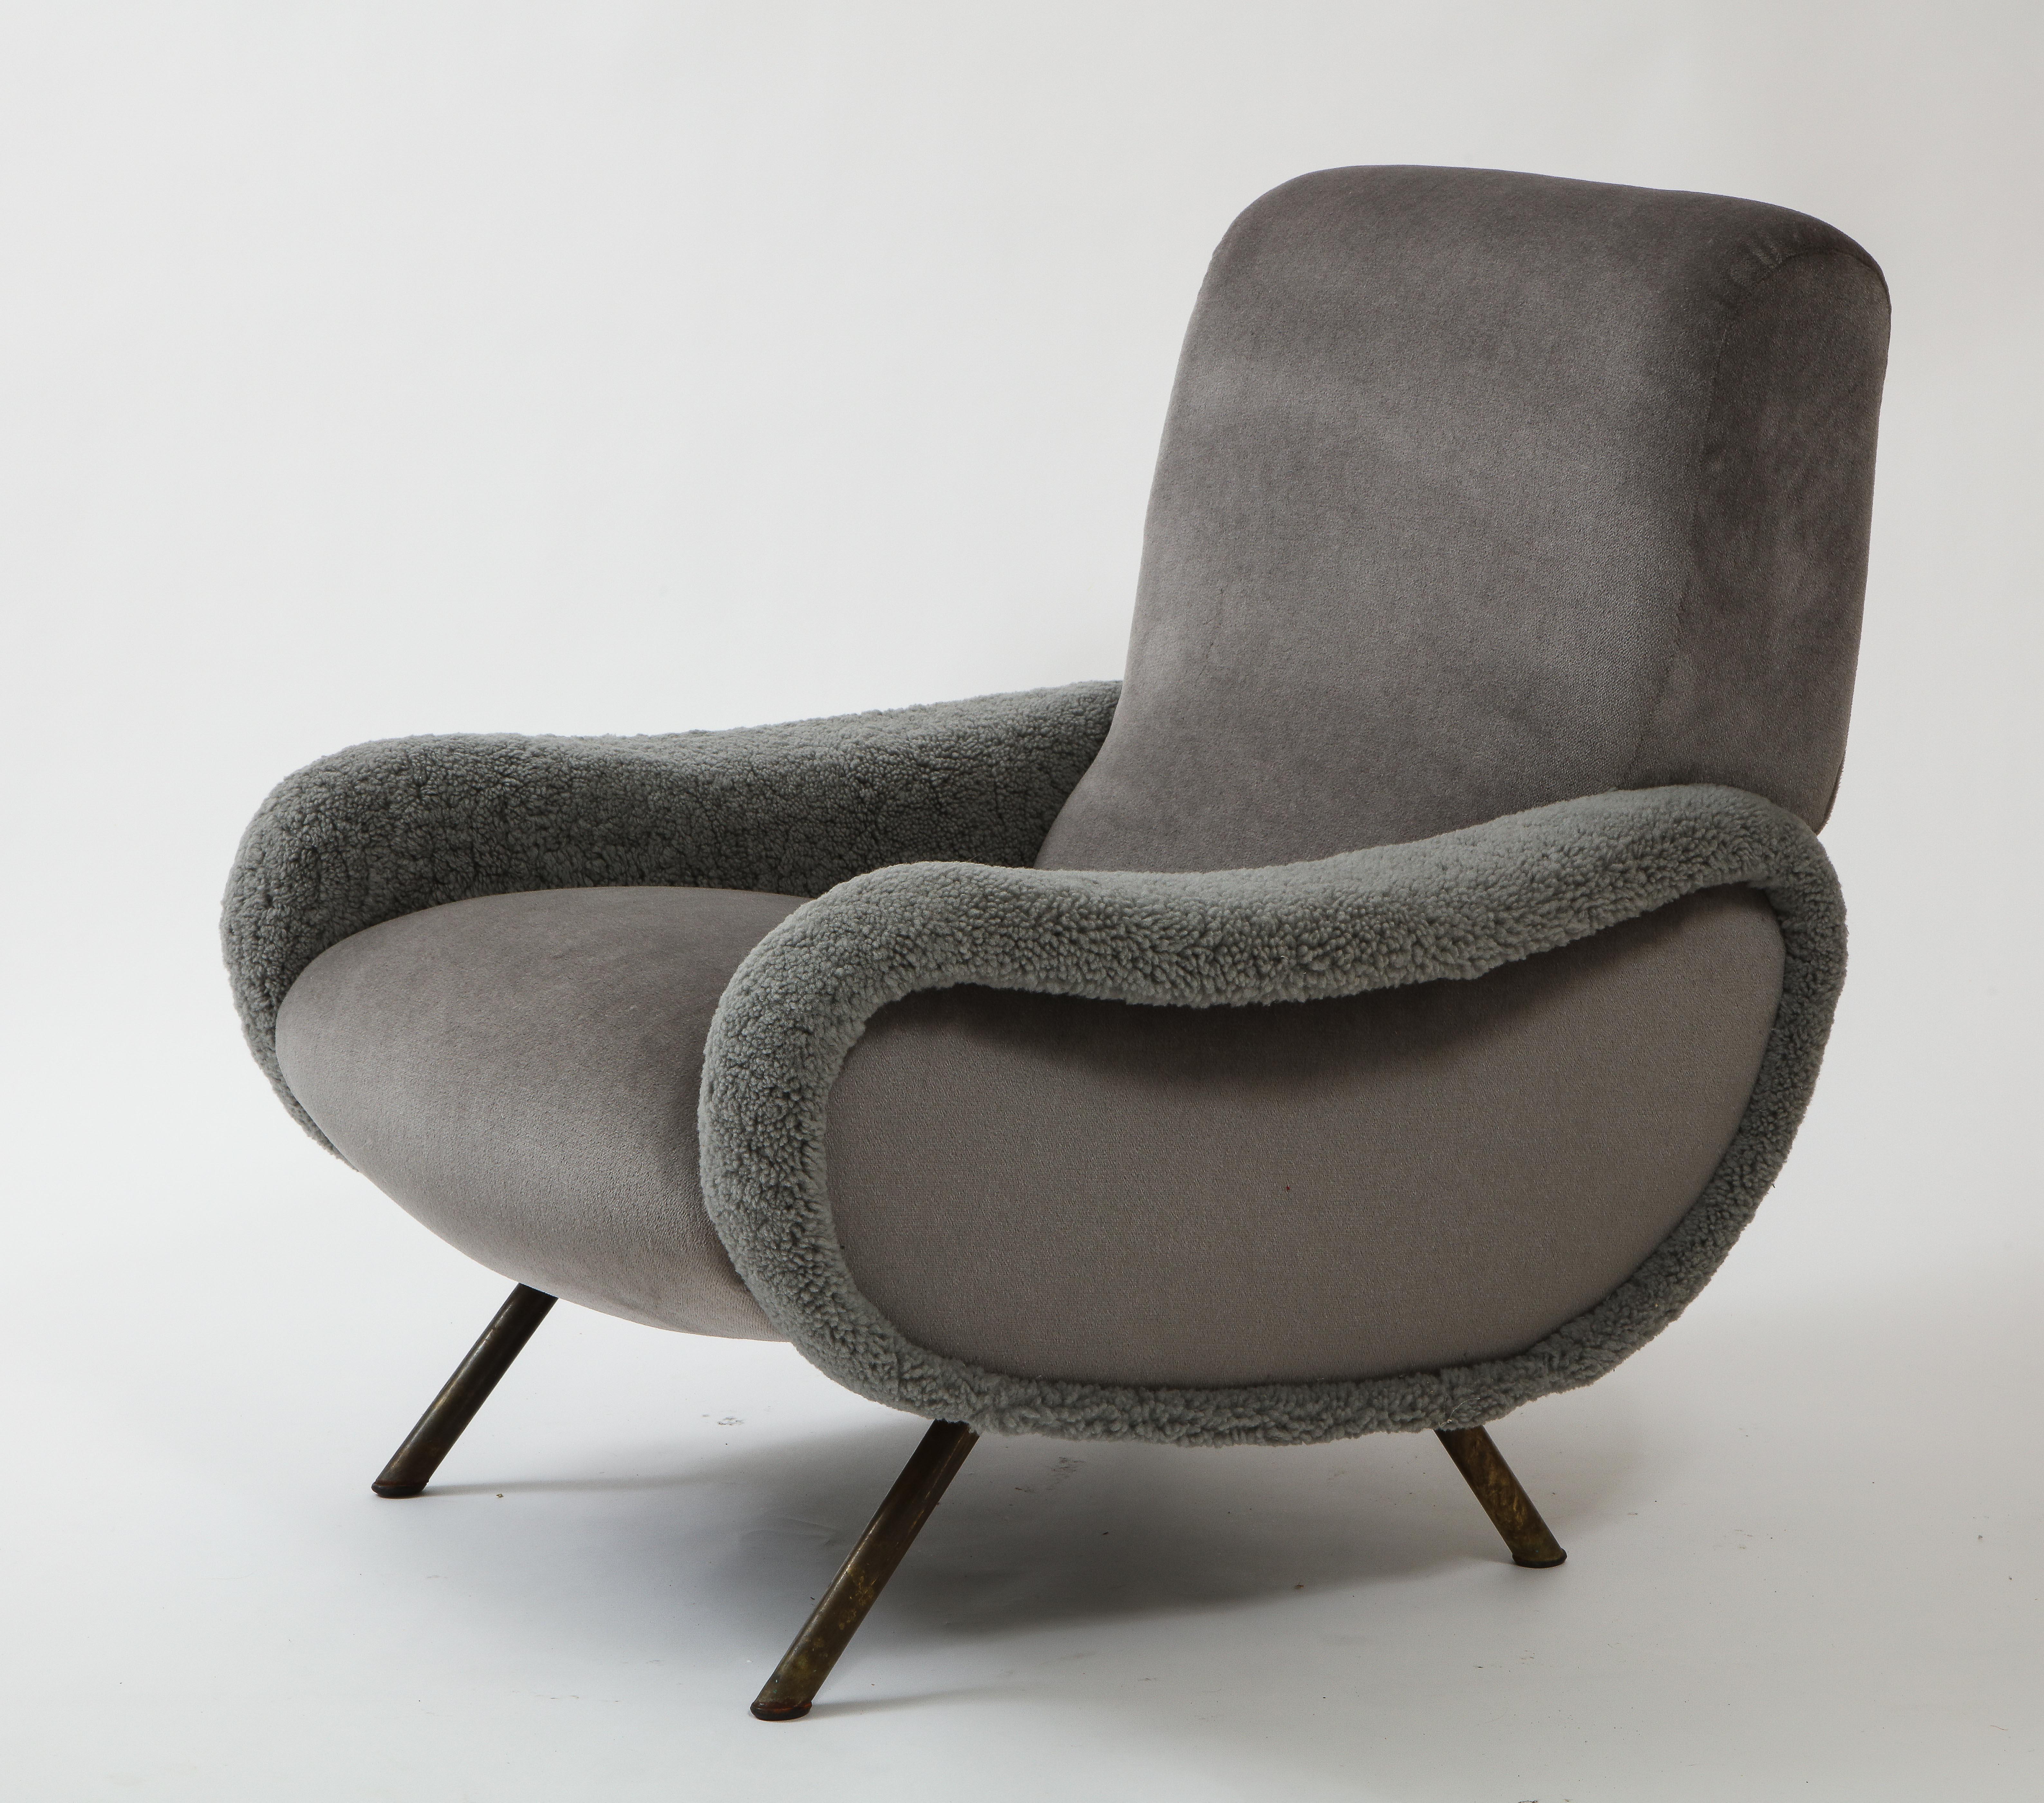 Marco Zanuso lady chair, mohair and shearling, midcentury Italy
Beautiful chair upholstered in mohair and shearling on the arms. Steel grey color.
Perfect for any decor.